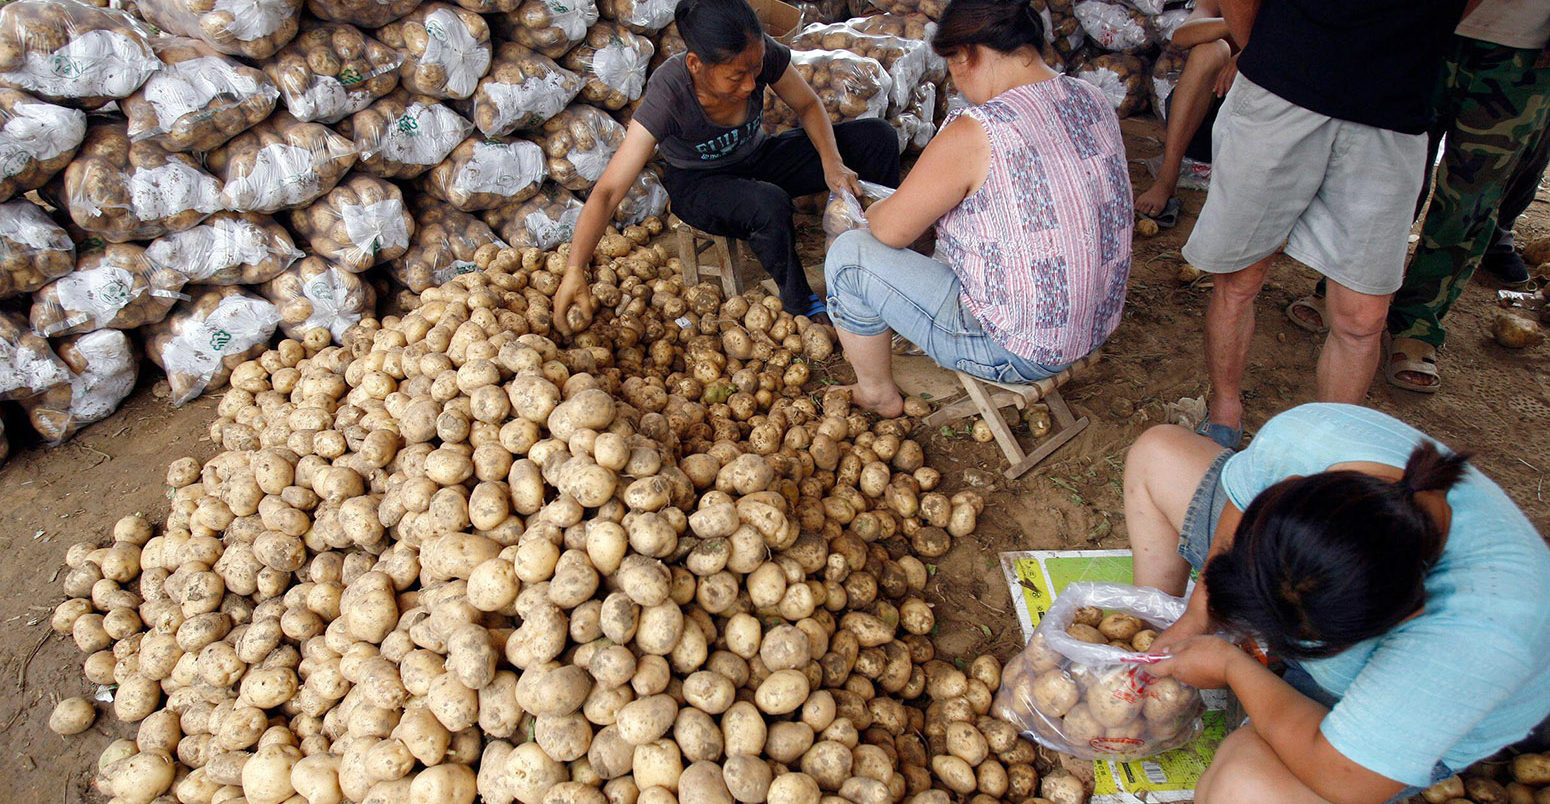 Women sort potatoes for packing at a market near Baoding, Hebei province, China. Credit: Reuters / Alamy Stock Photo.